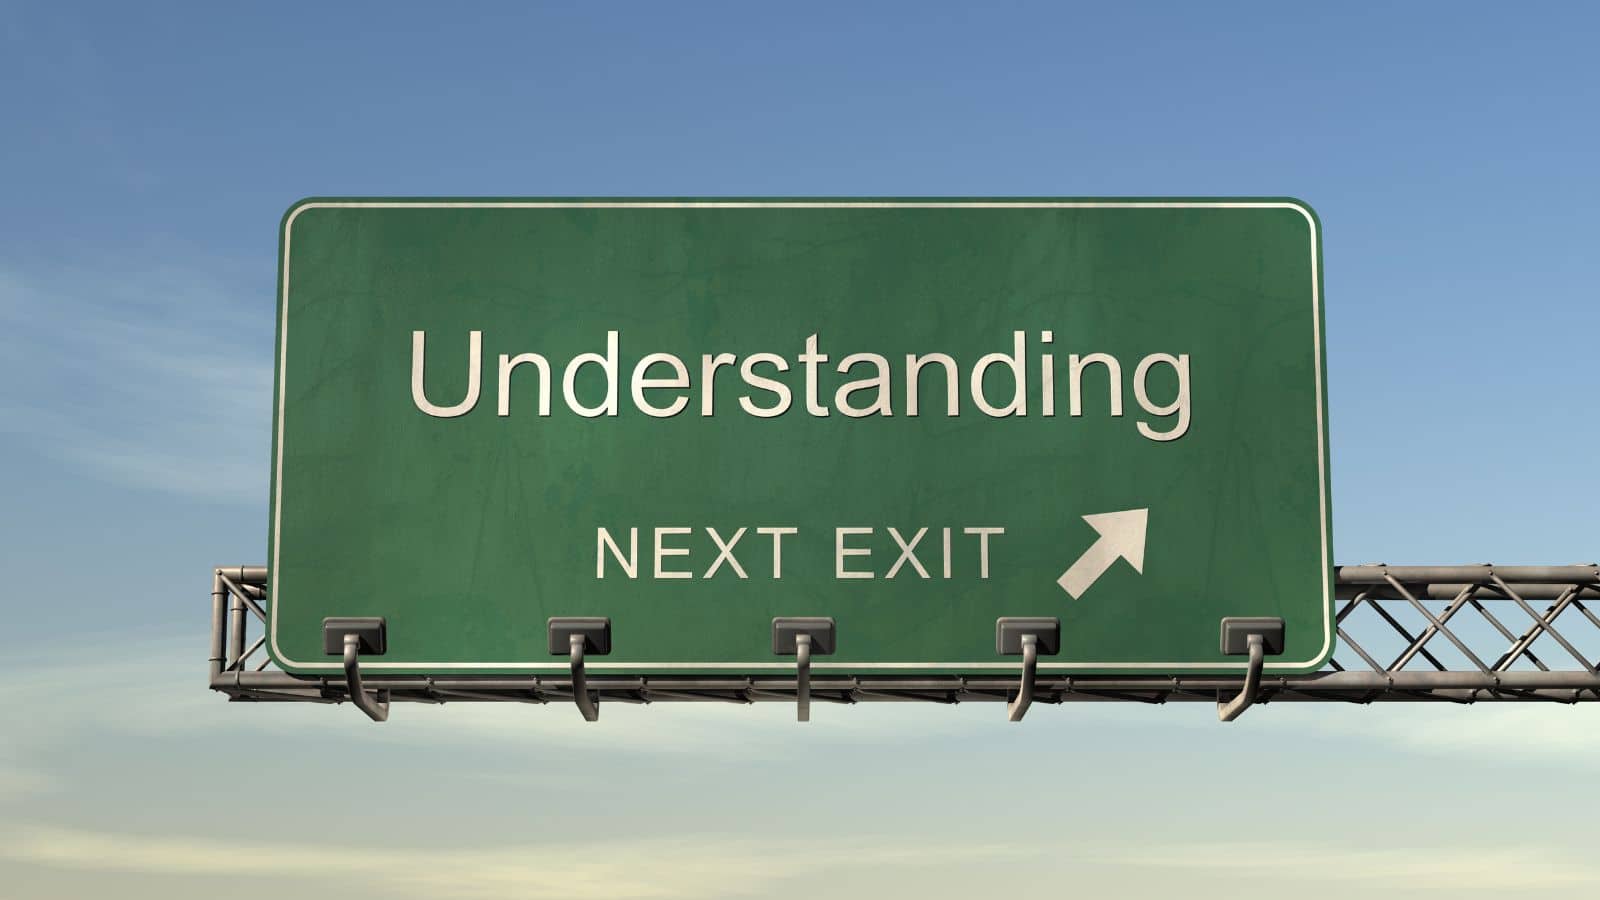 Green interstate exit sign that says "Understanding Next Exit"